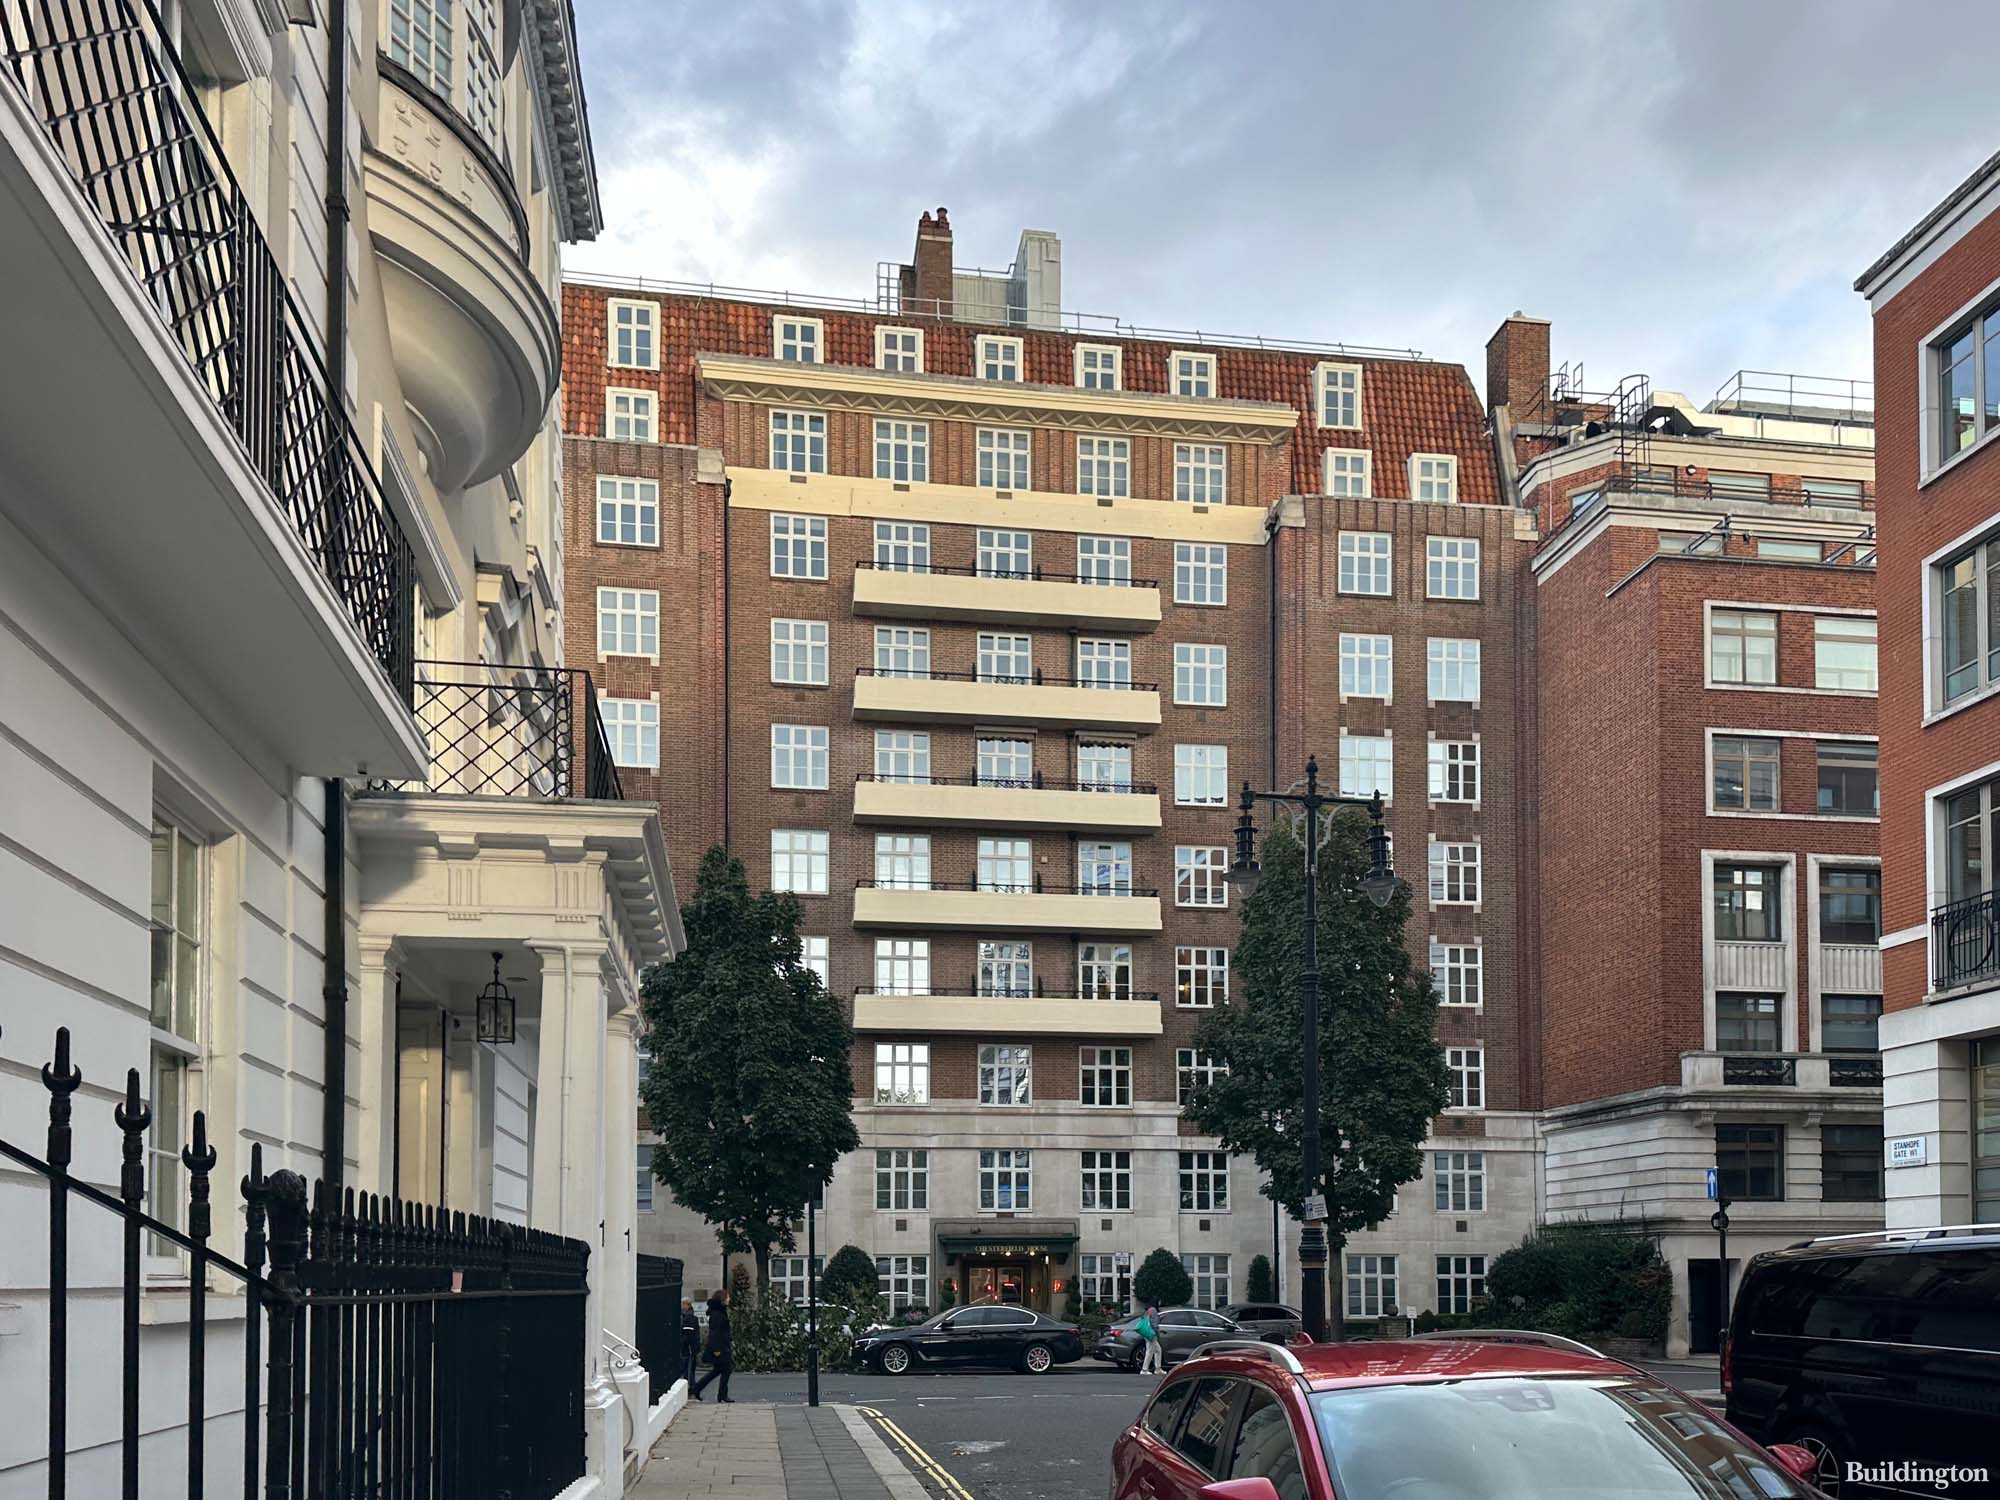 Chesterfield House apartments from Stanhope Gate in Mayfair, London W1.